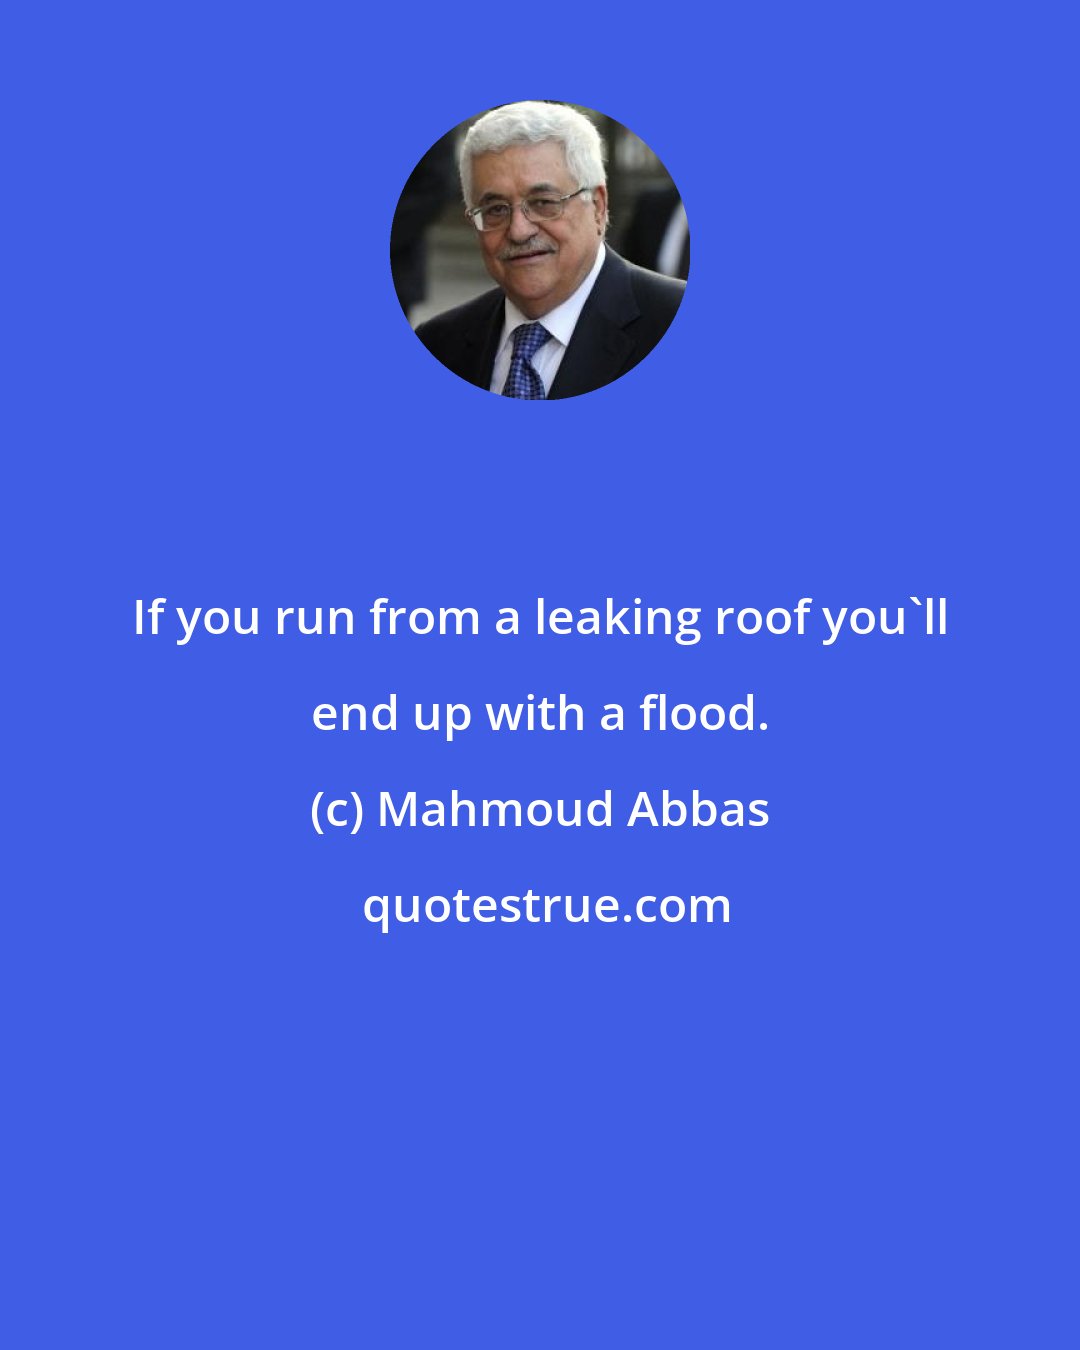 Mahmoud Abbas: If you run from a leaking roof you'll end up with a flood.